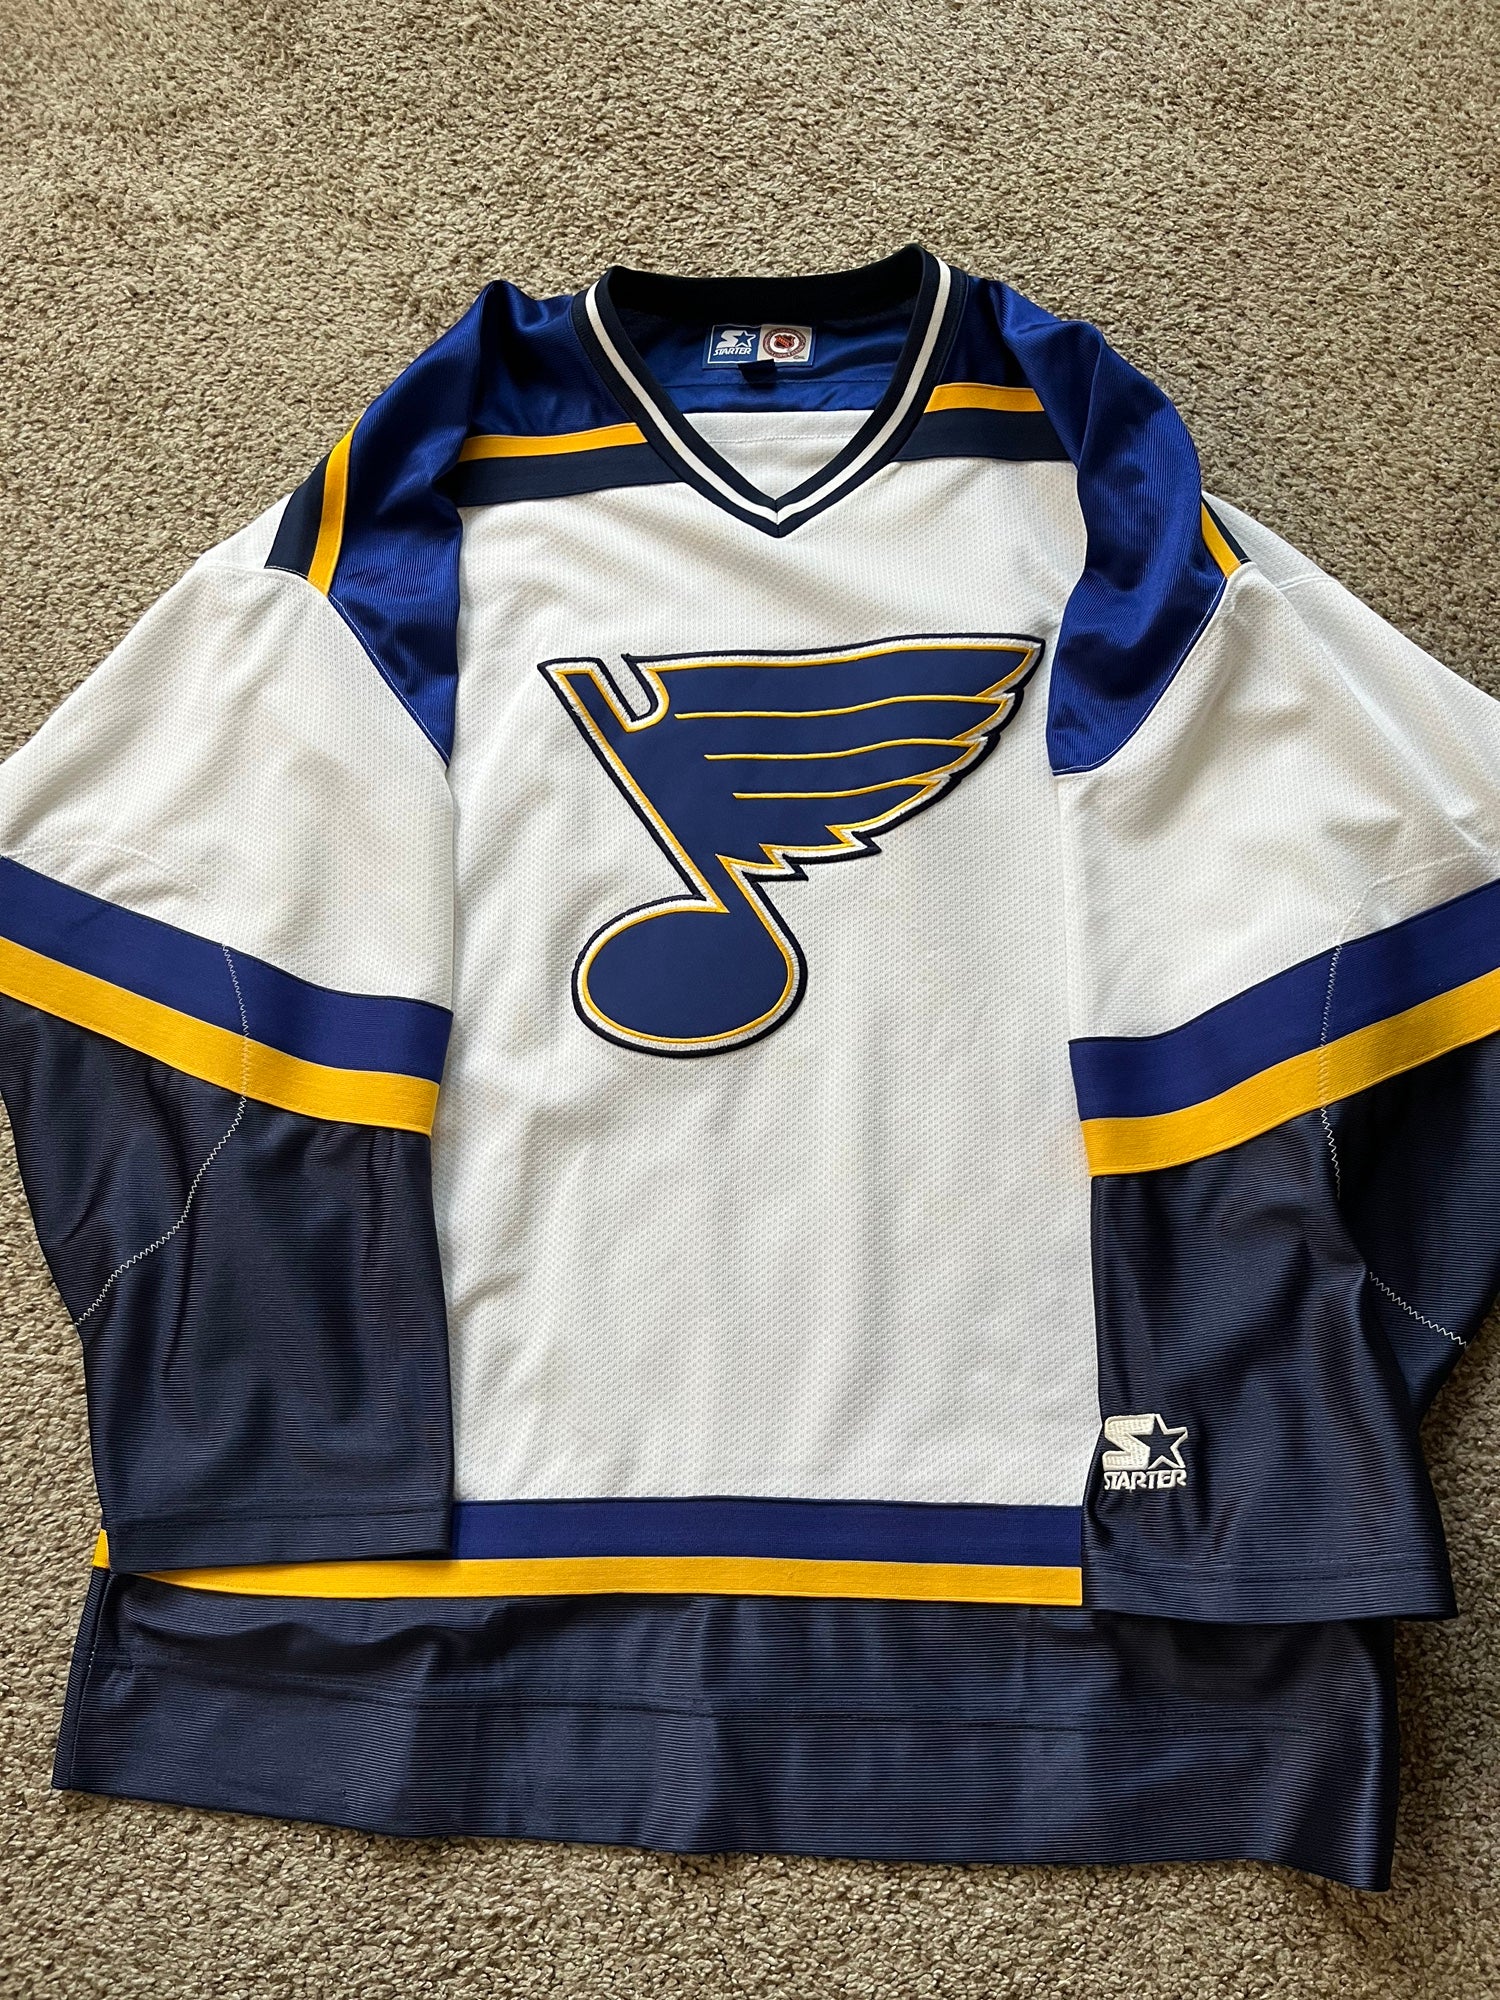 St Louis Cardinals Blues Adult Fox Sports Midwest Promotional Hockey Jersey XL